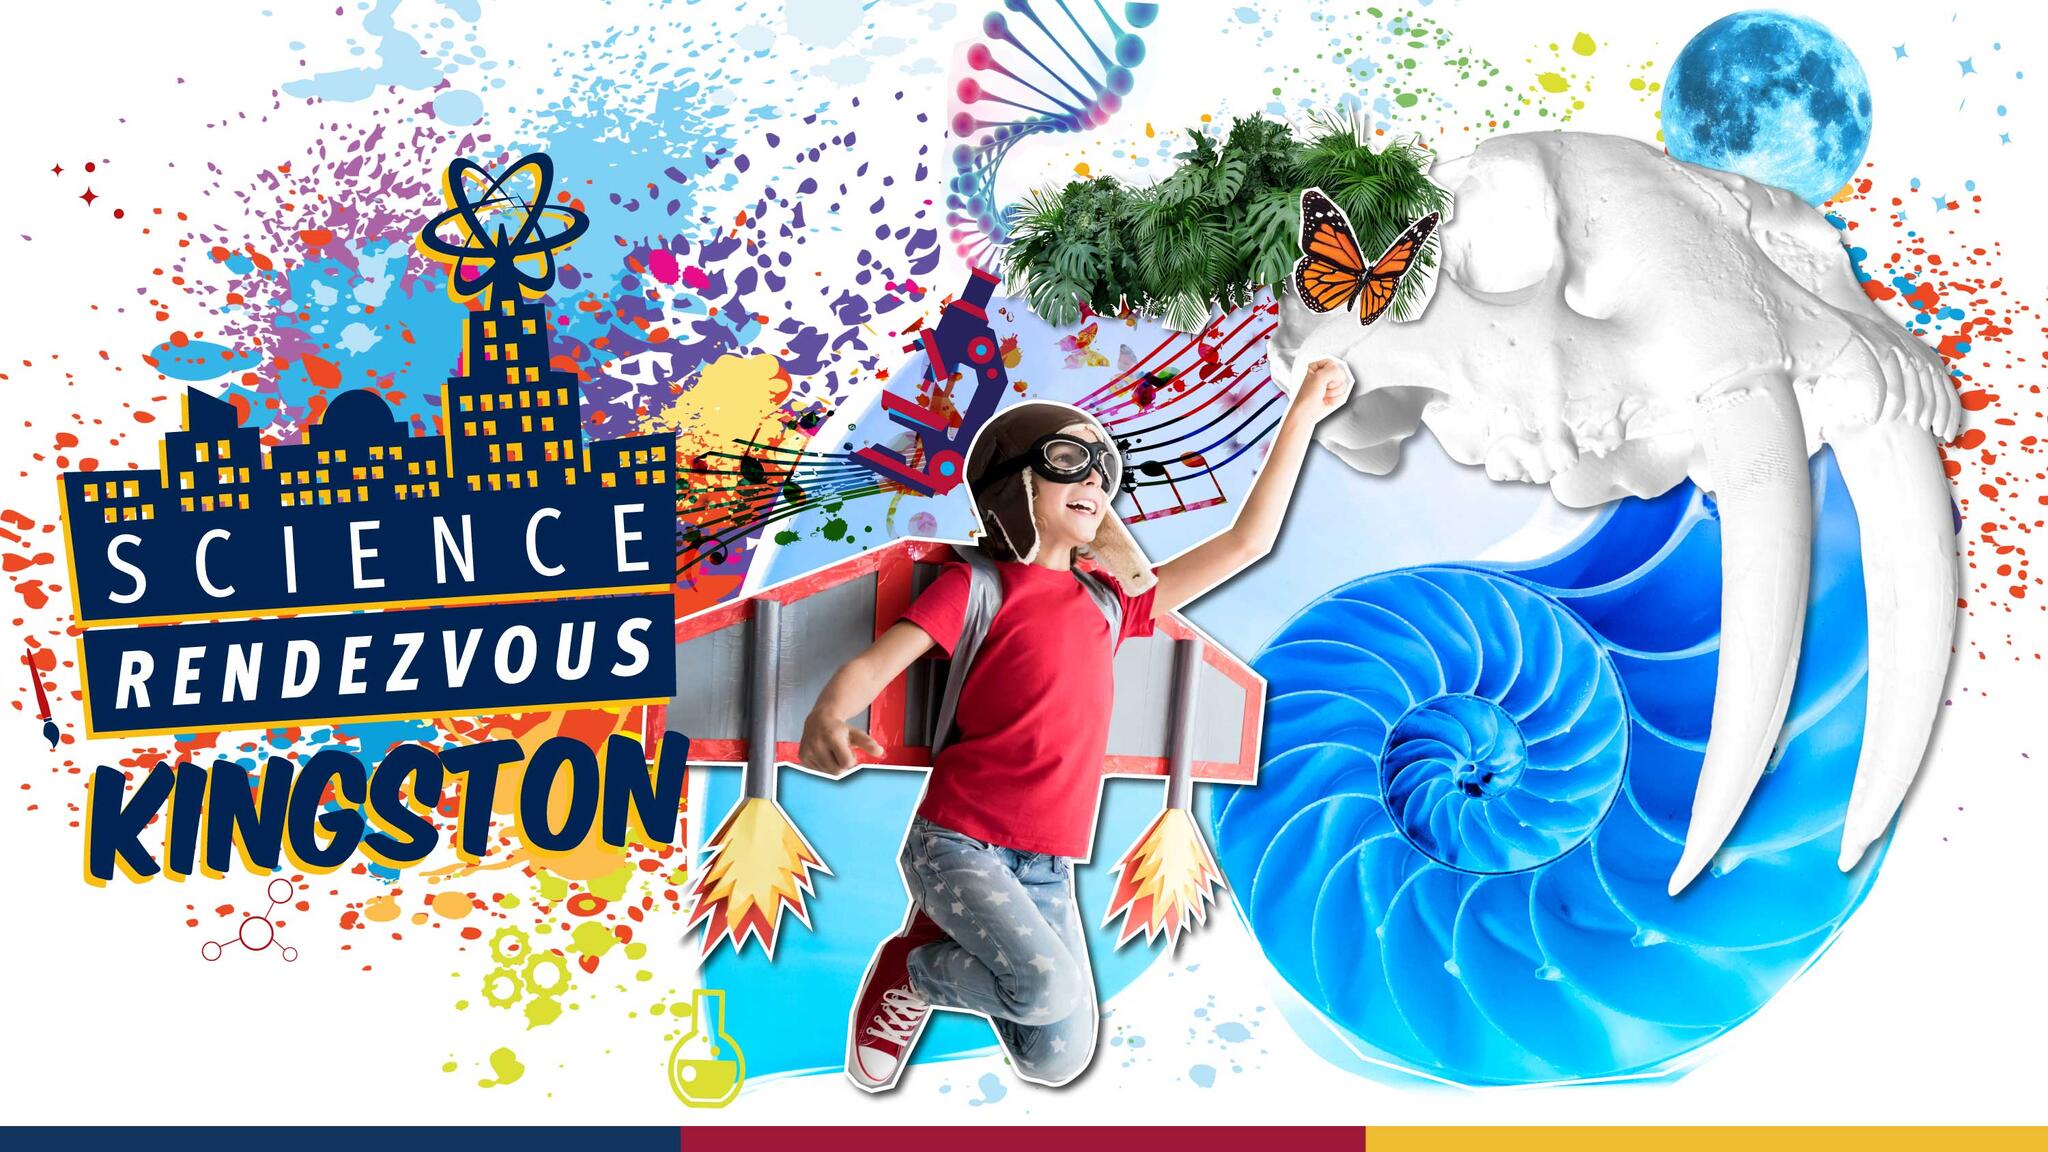 Decorative graphic showing a child with a cardboard jetpack chasing a butterfly. The image also includes a DNA strand and fossils and the Science Rendezvous Kingston logo.